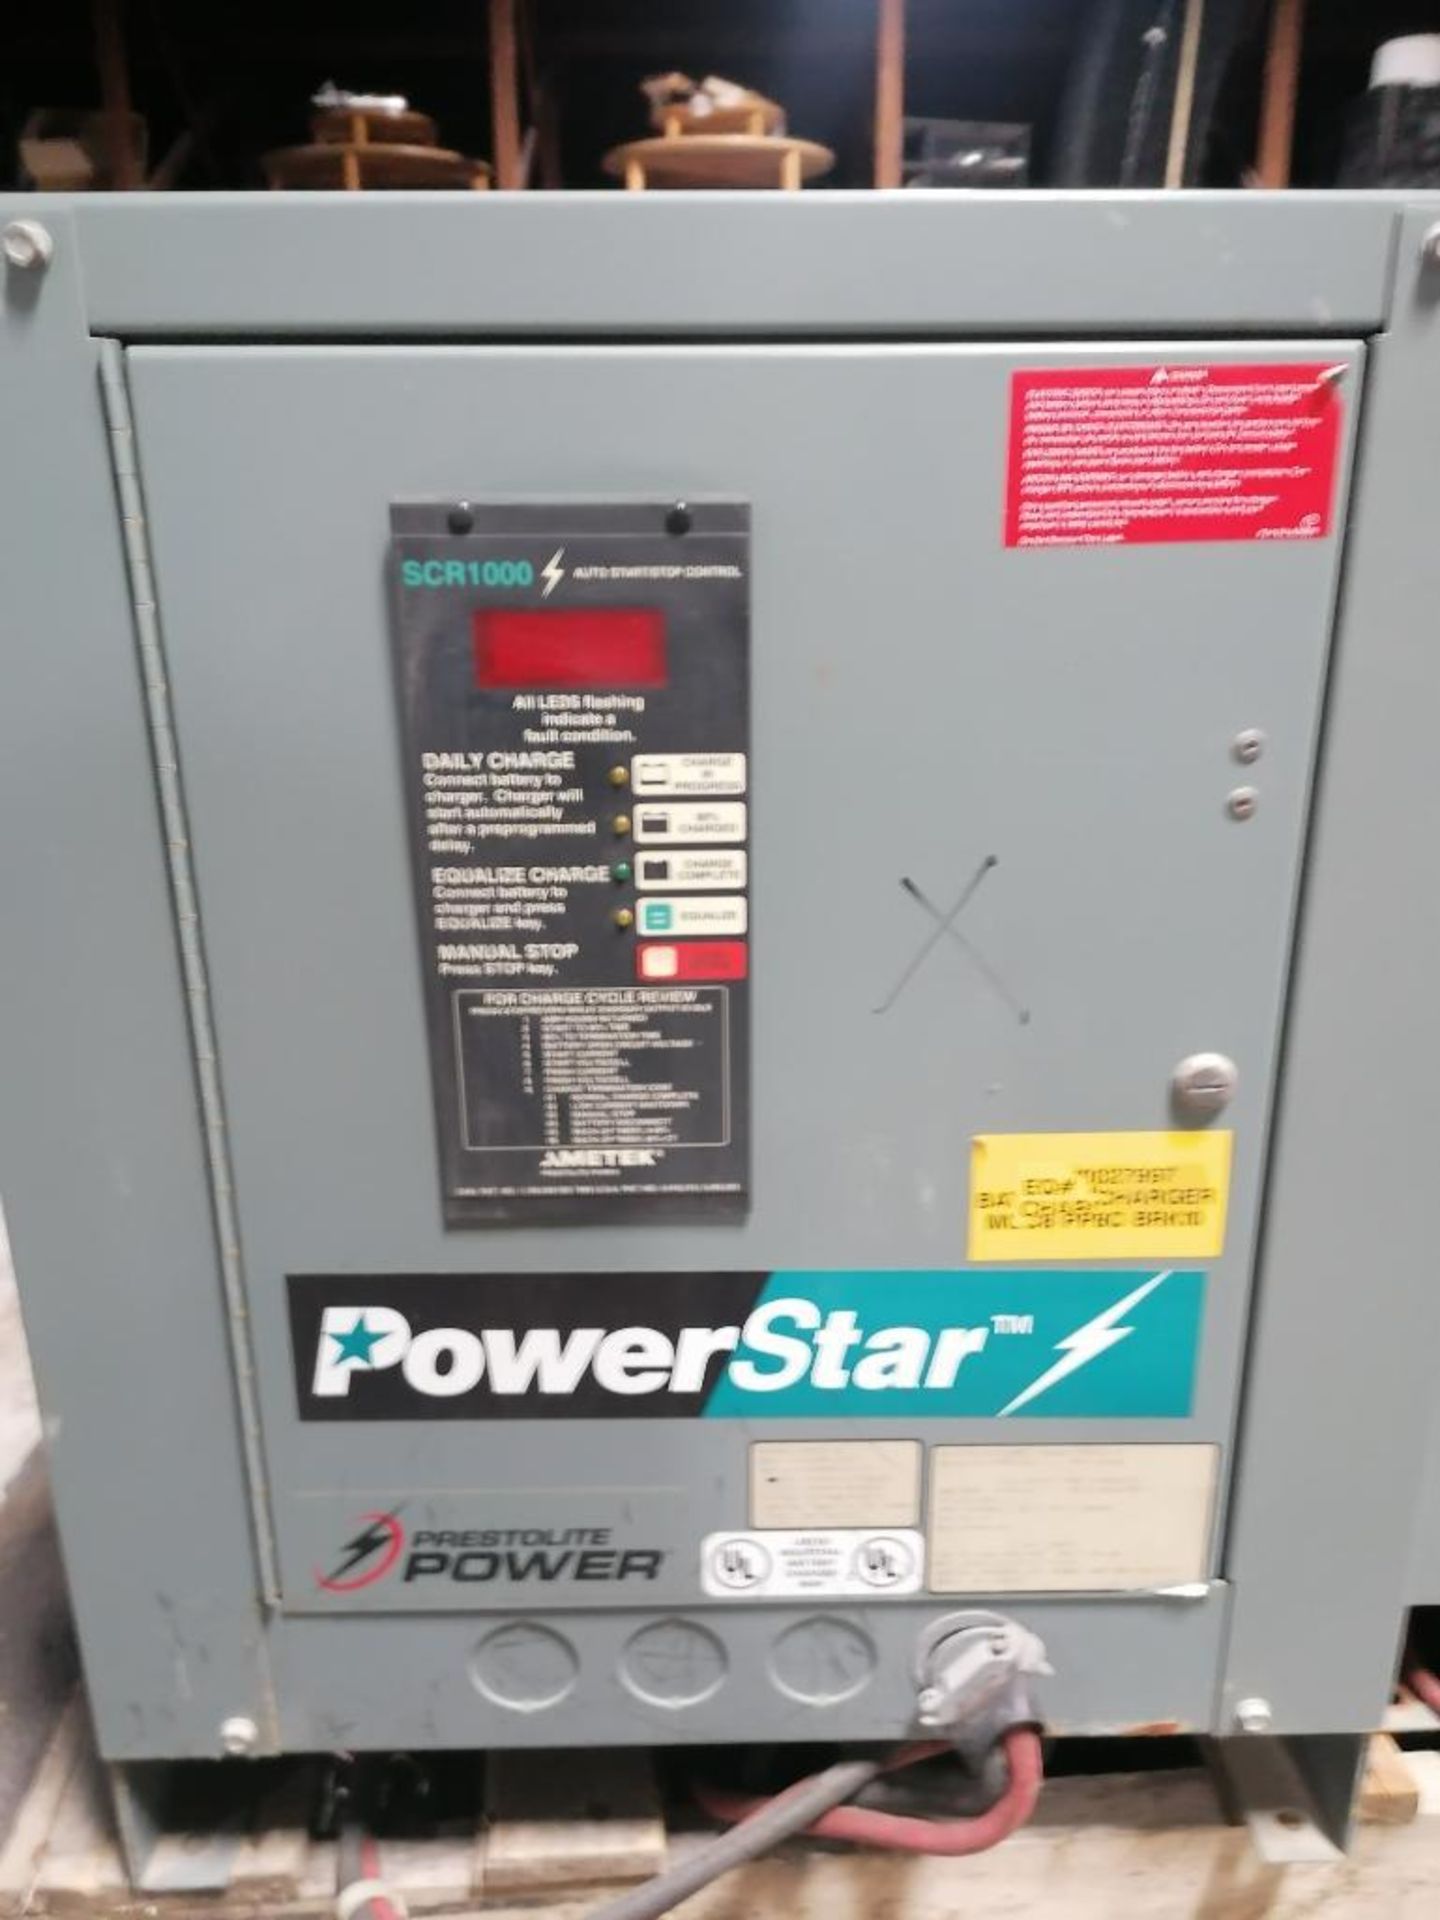 (4) PowerStar SCR1000 Industrial Forklift Battery Charger, Model 98Y3-12, Serial #404CS21472, Serial - Image 3 of 19